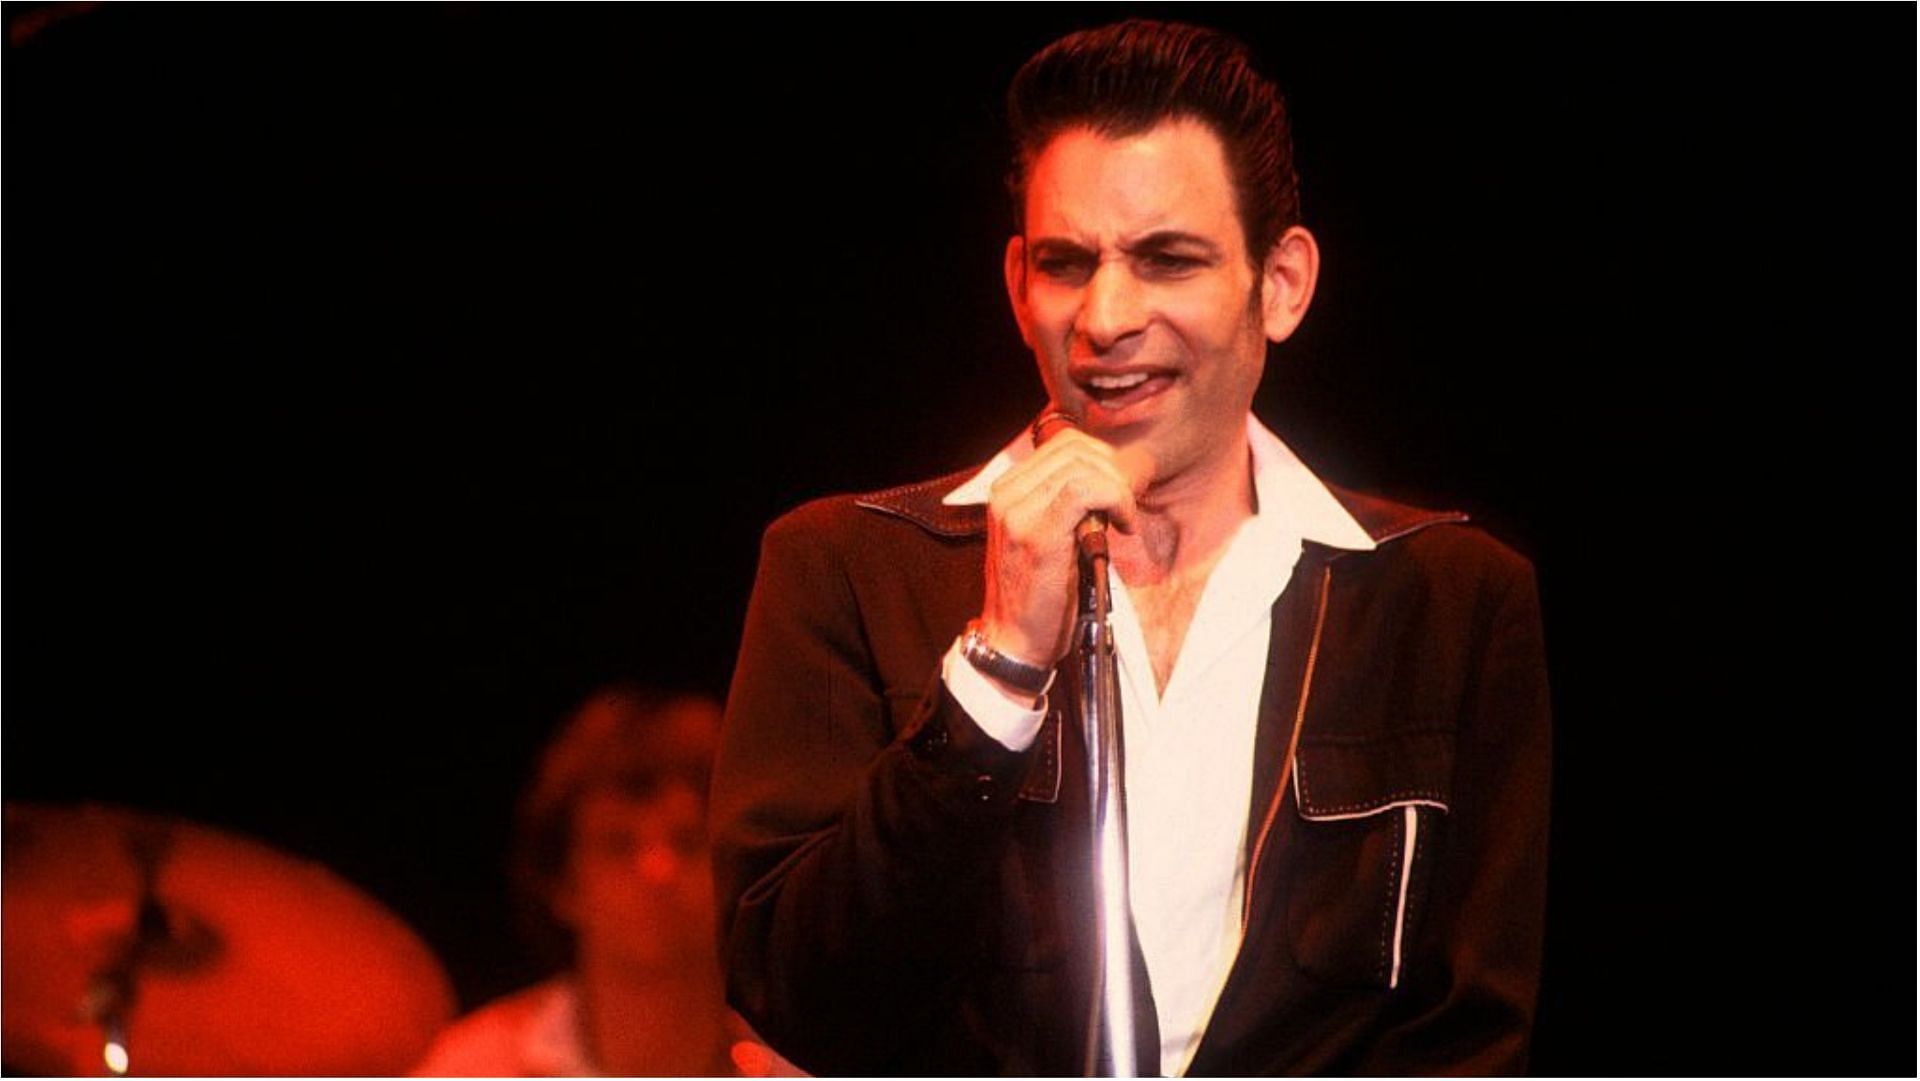 Robert Gordon was a well-known singer (Image via Paul Natkin/Getty Images)